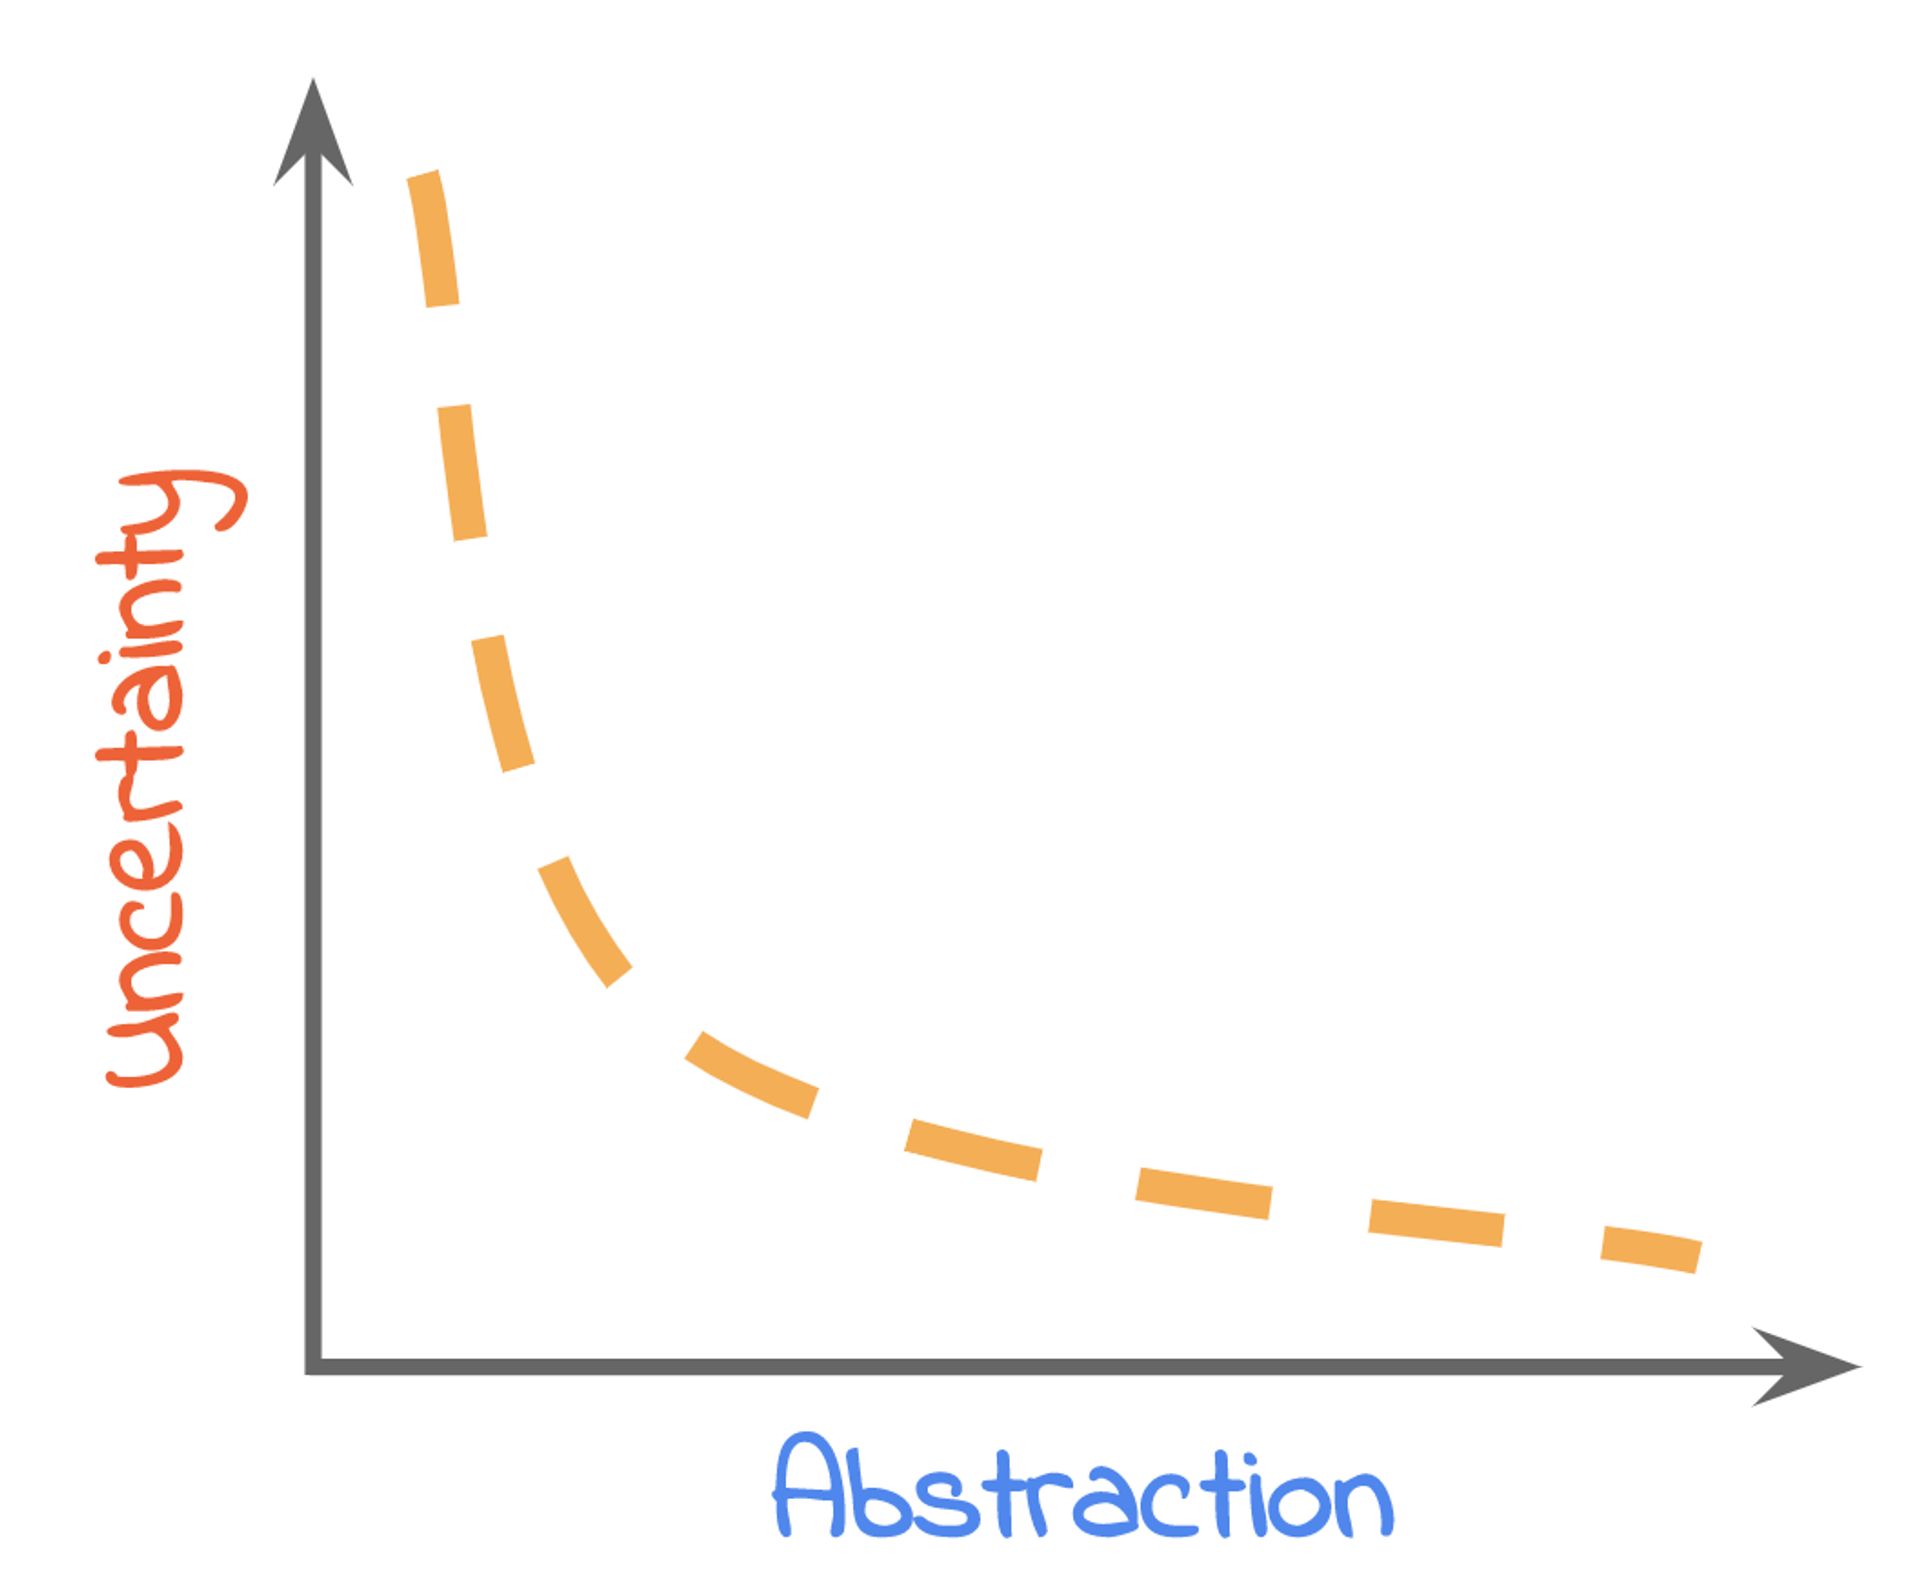 Graph showing very unscientifically how uncertainty and abstraction should be related to another.